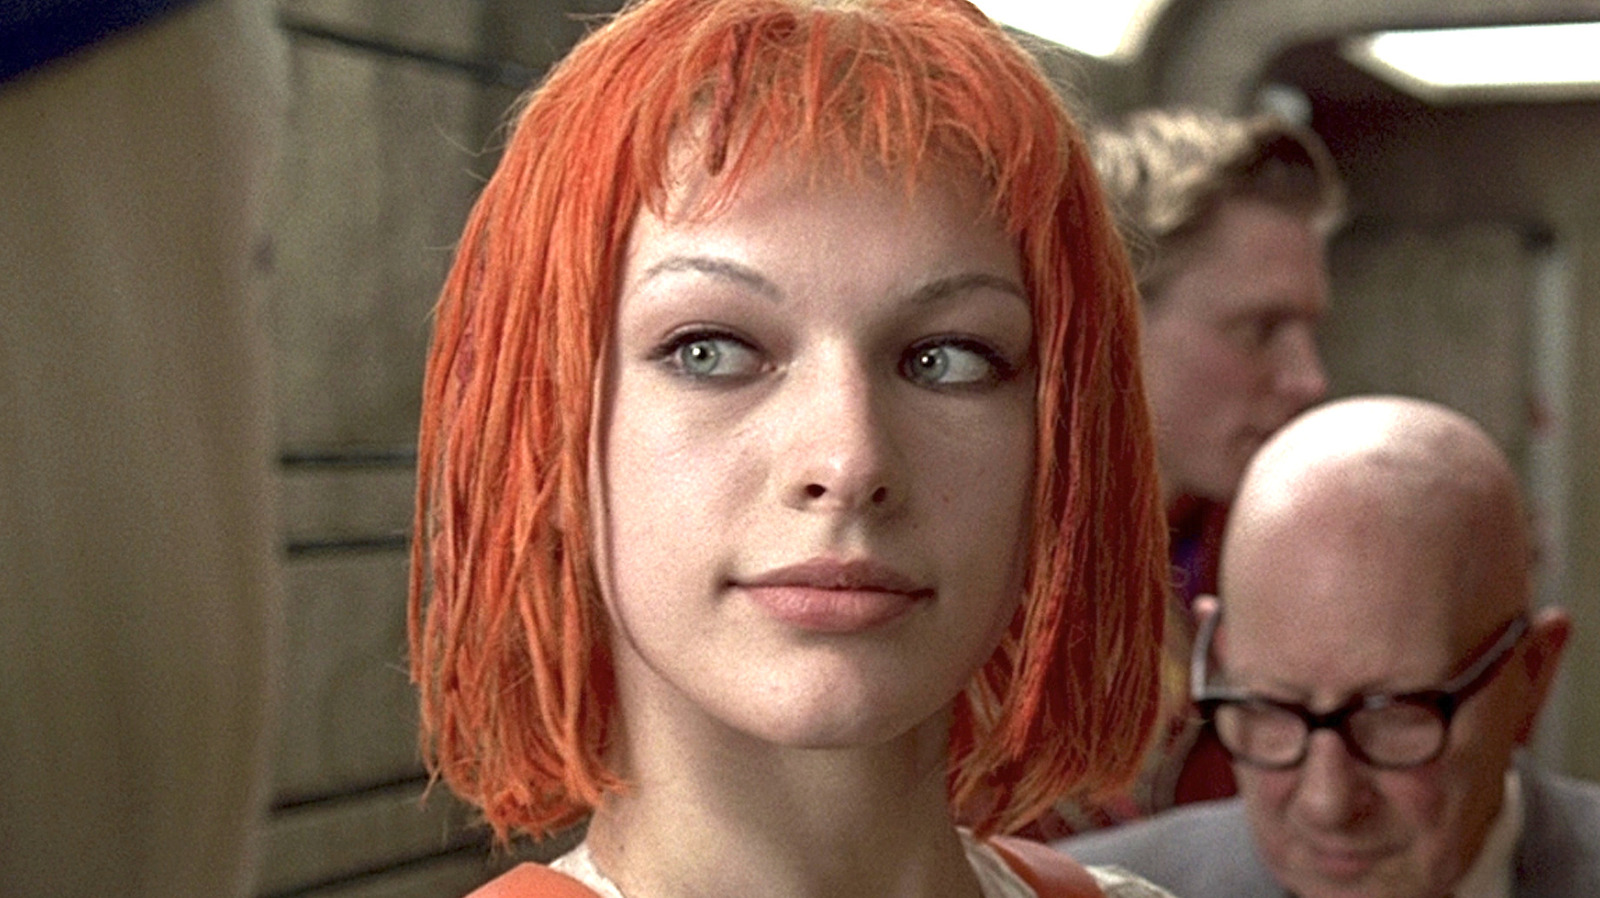 What Language Does Leeloo Speak In The Fifth Element?